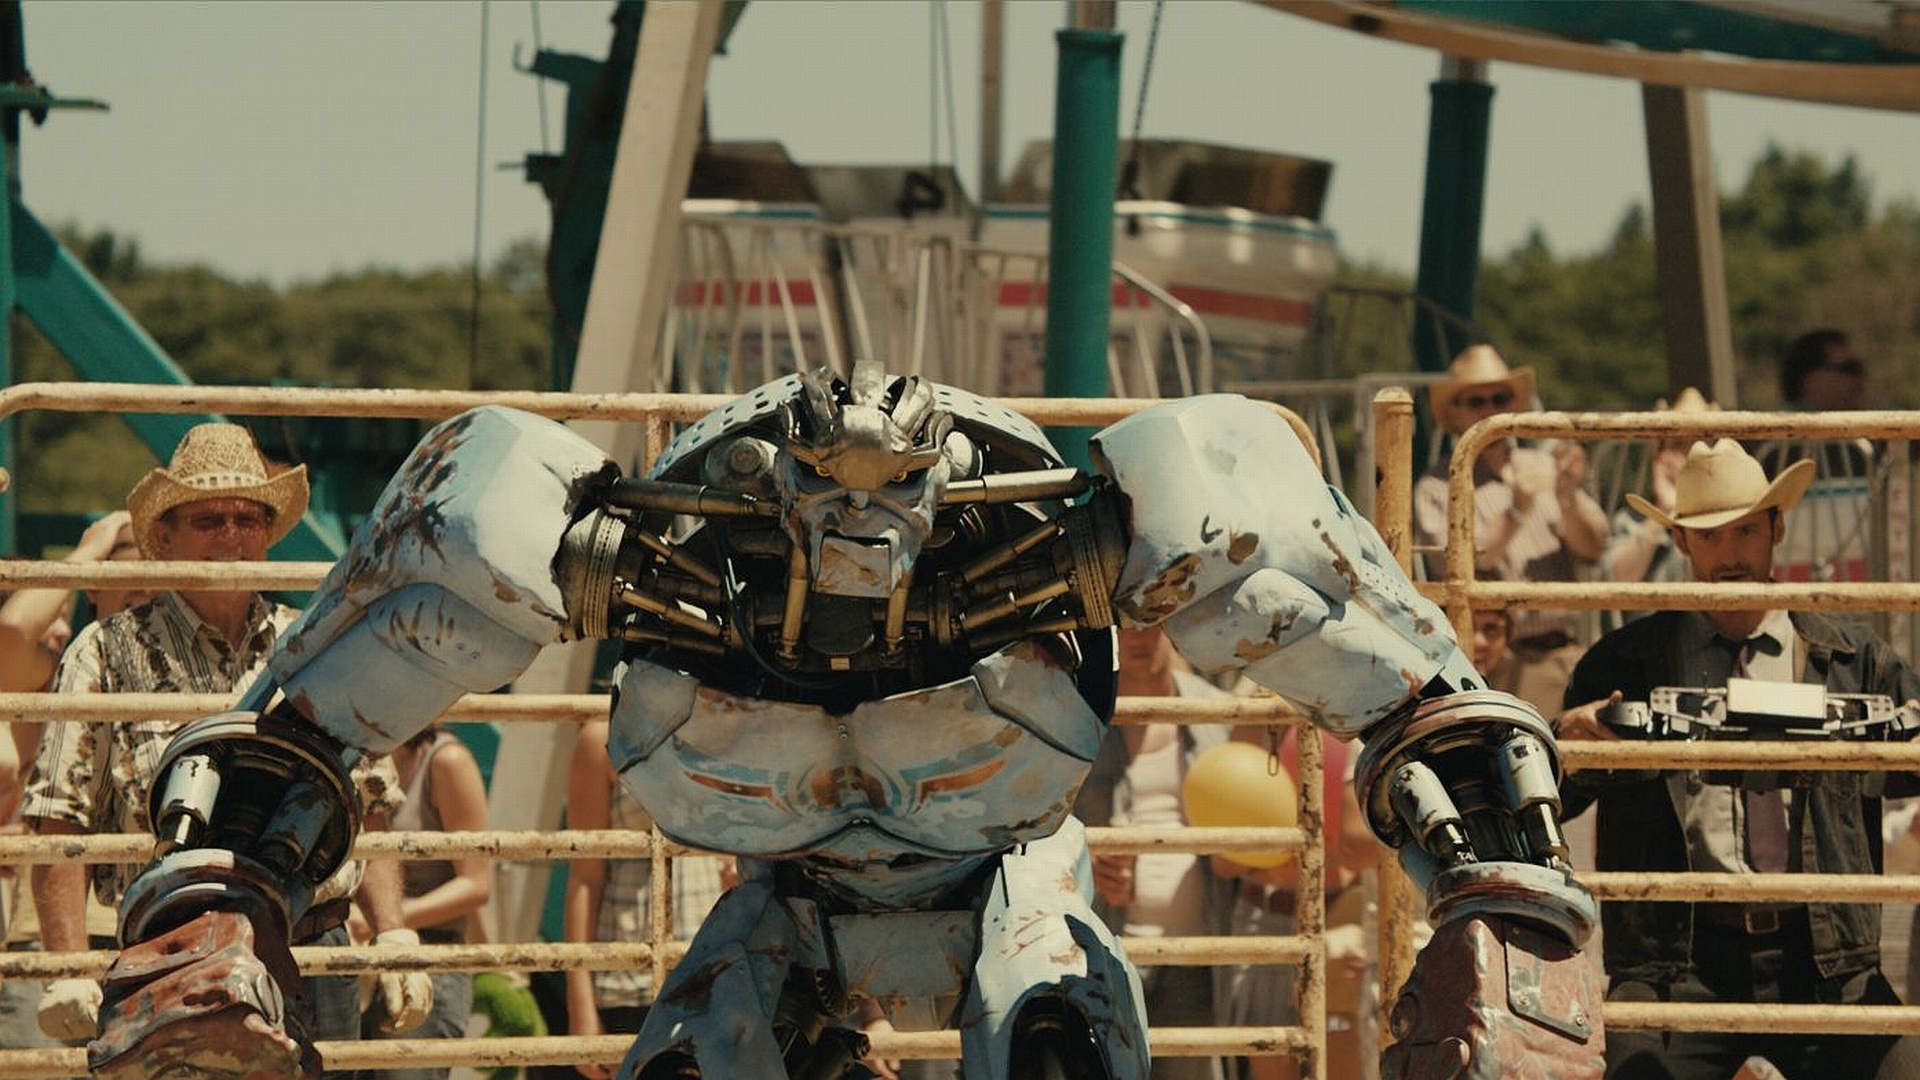 Real Steel: Boxing ring, High-tech robot fighter. 1920x1080 Full HD Wallpaper.